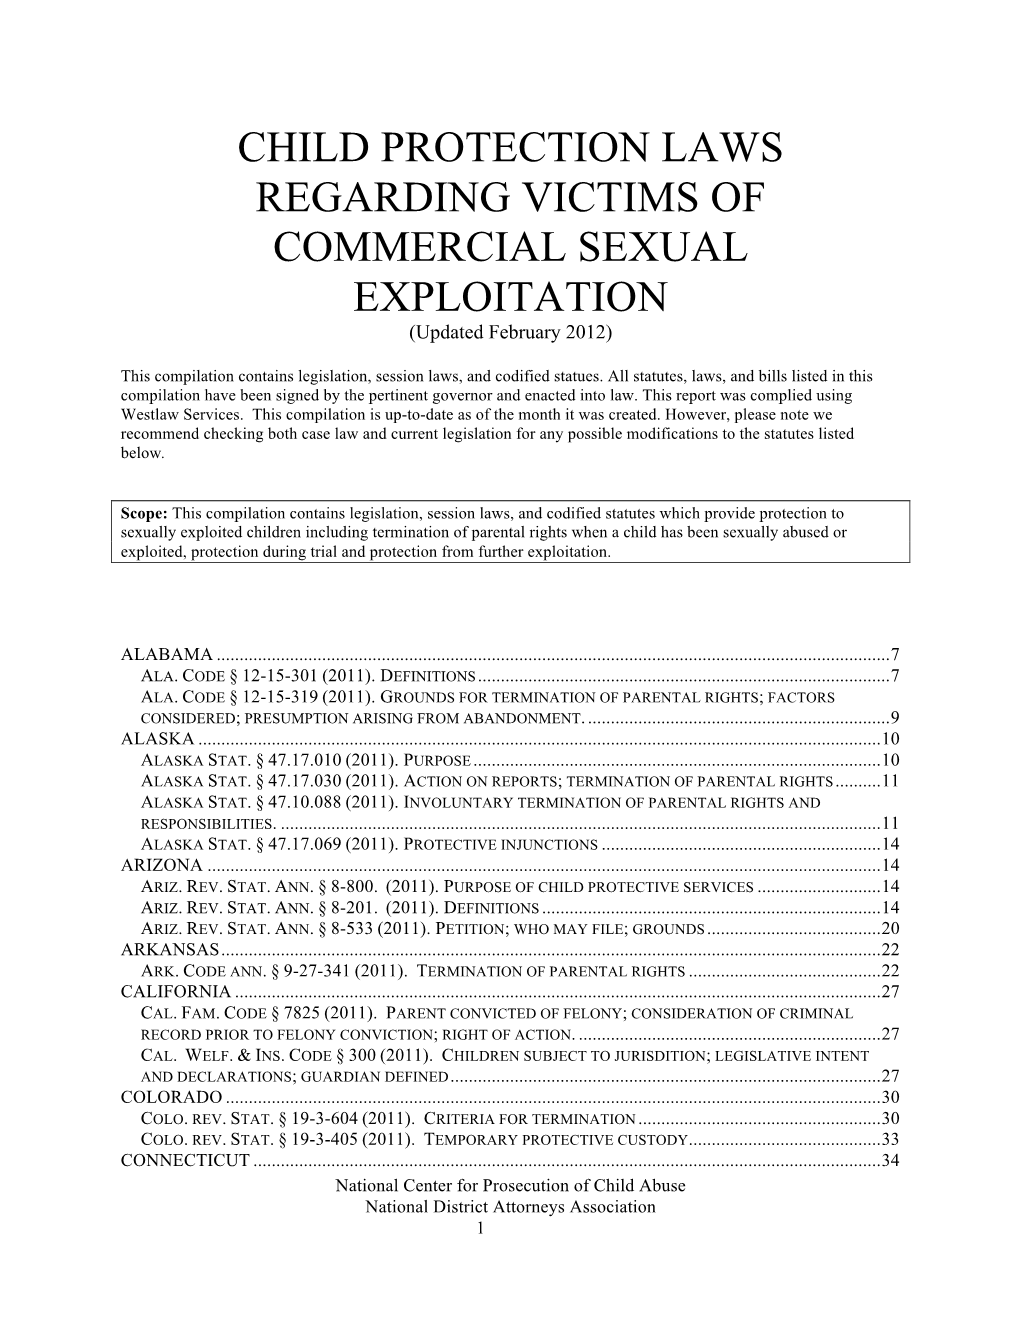 CHILD PROTECTION LAWS REGARDING VICTIMS of COMMERCIAL SEXUAL EXPLOITATION (Updated February 2012)